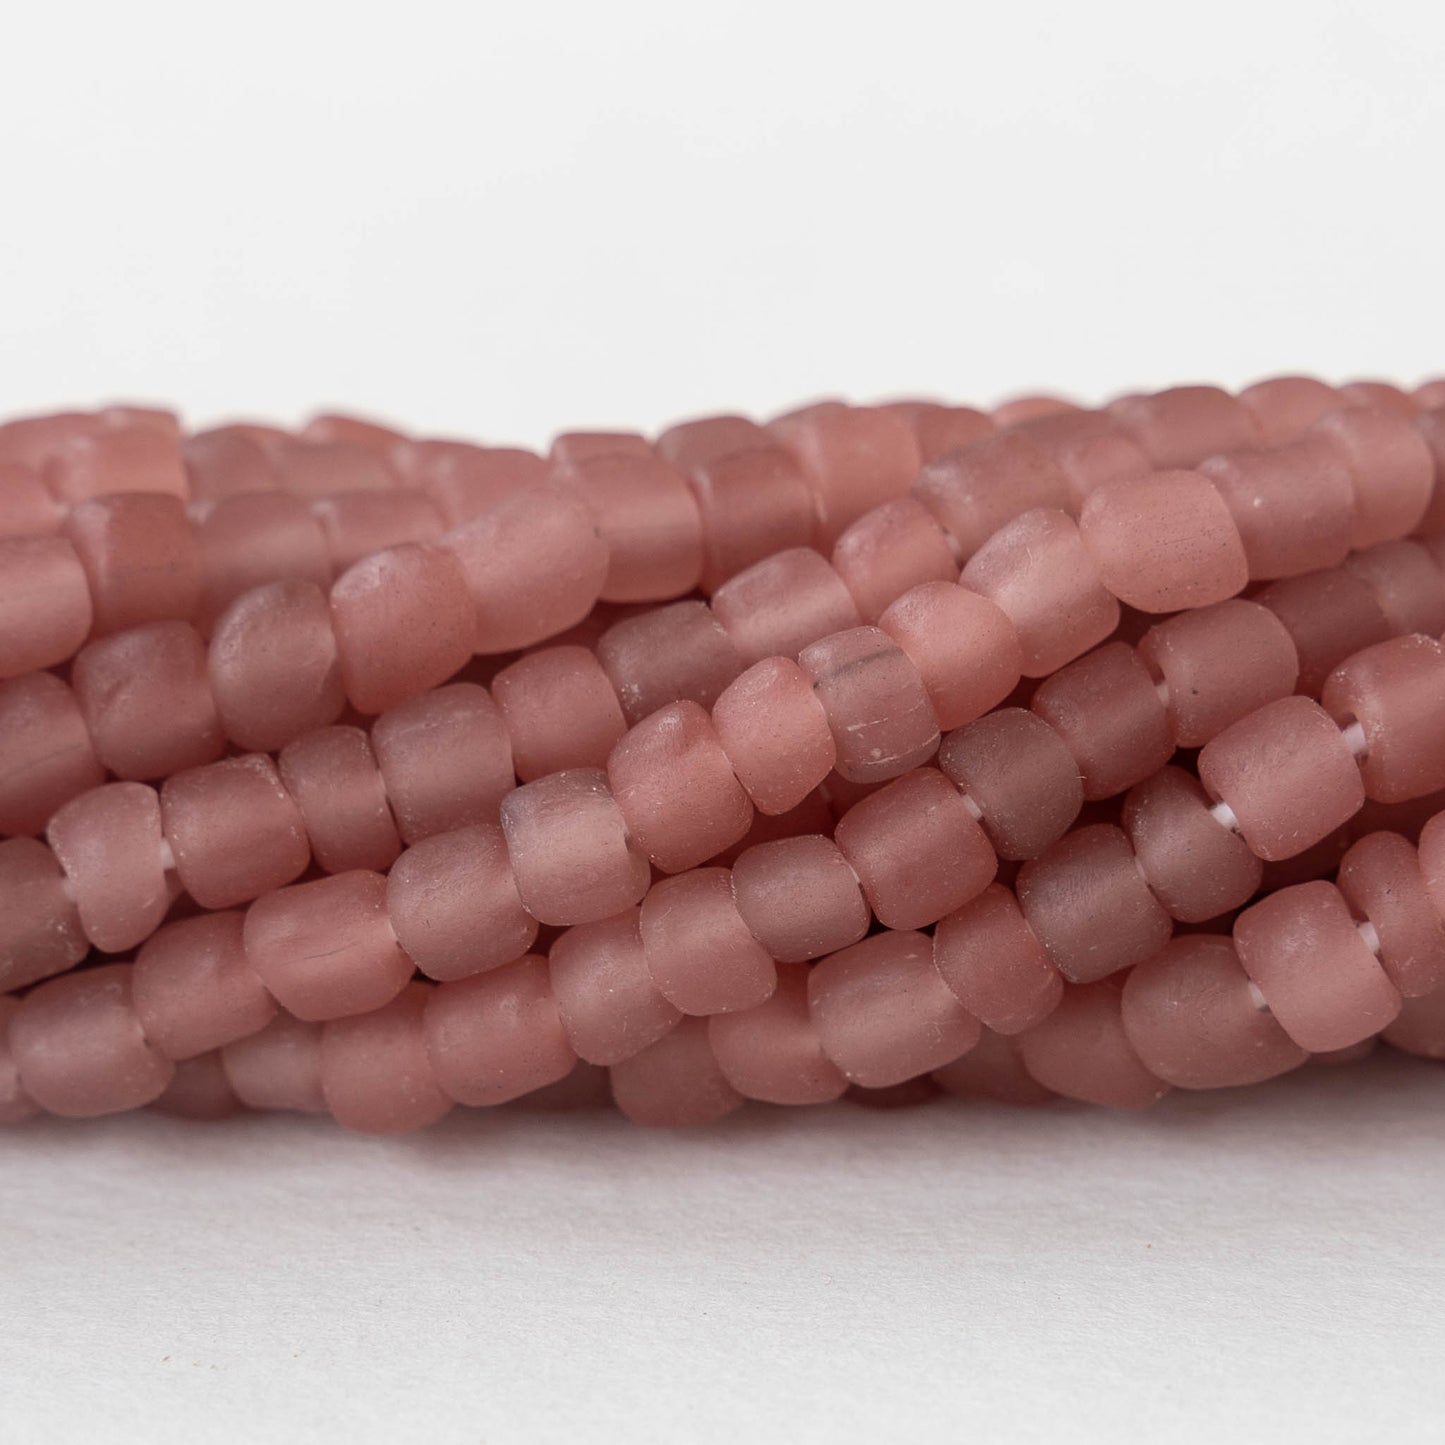 Java Trade Beads - Rose - 12 Inches